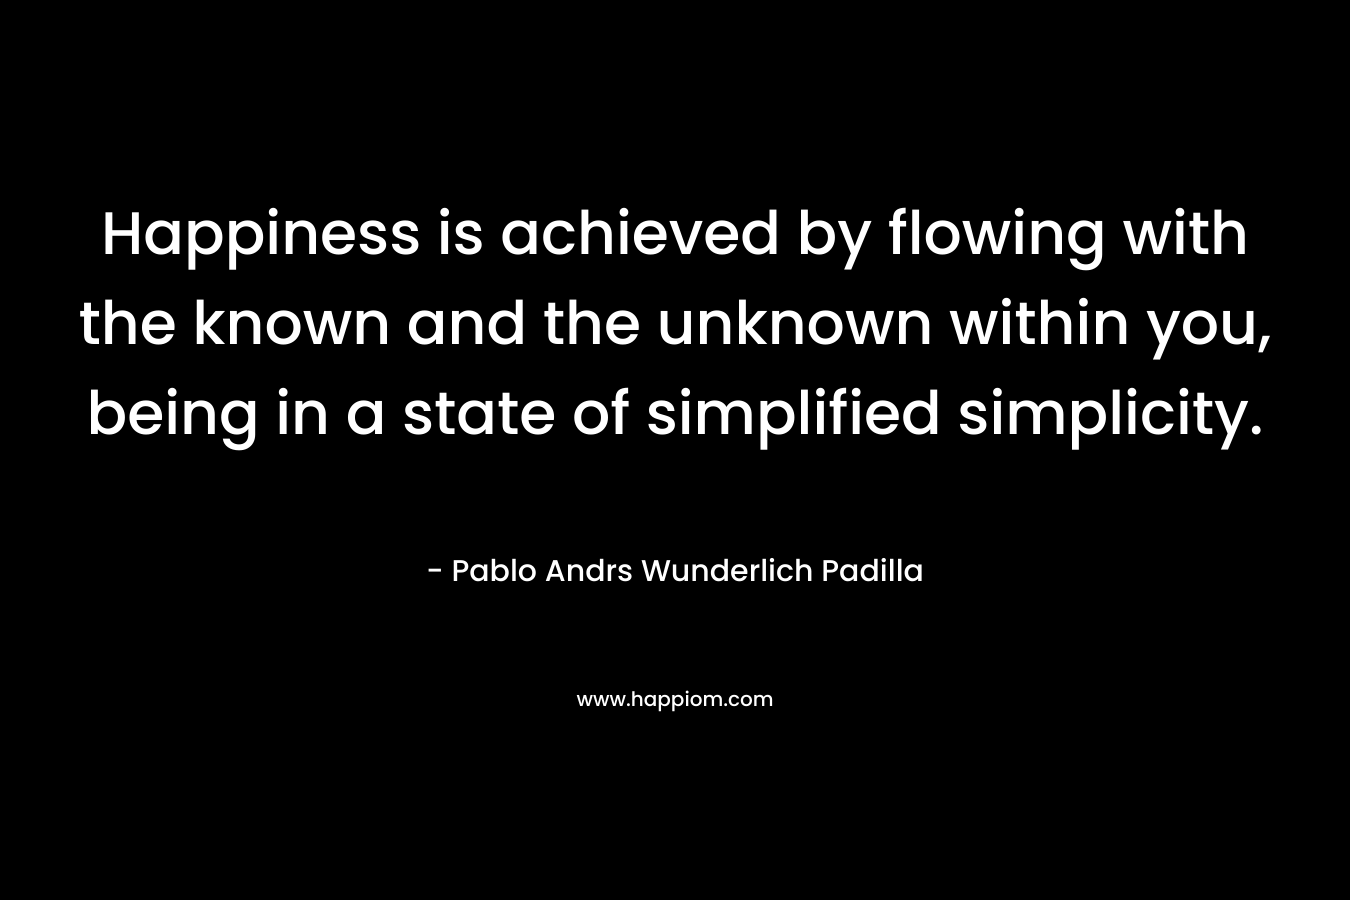 Happiness is achieved by flowing with the known and the unknown within you, being in a state of simplified simplicity. – Pablo Andrs Wunderlich Padilla